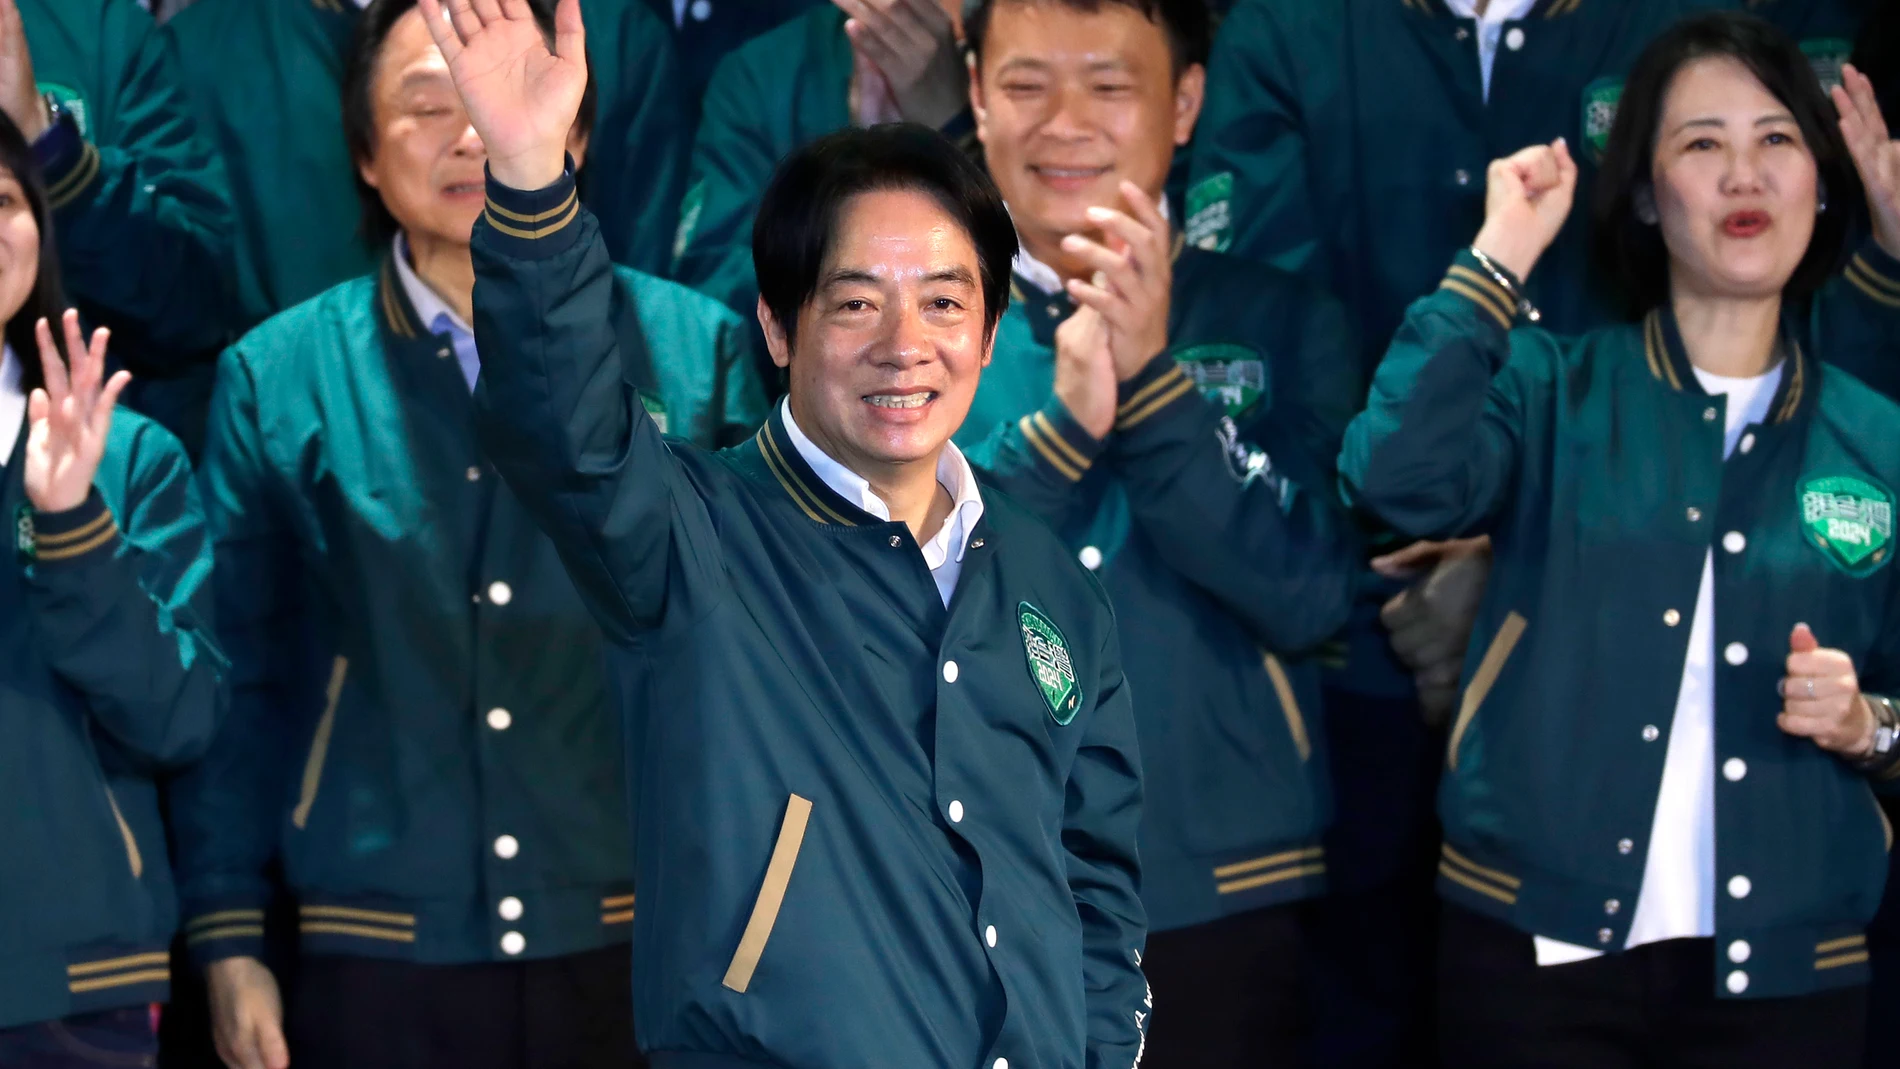 The ruling Democratic Progressive Party presidential candidate William Lai waves during the party congress of the ruling Democratic Progressive Party in Taipei, Taiwan, Sunday, July 16, 2023. (AP Photo/Chiang Ying-ying)